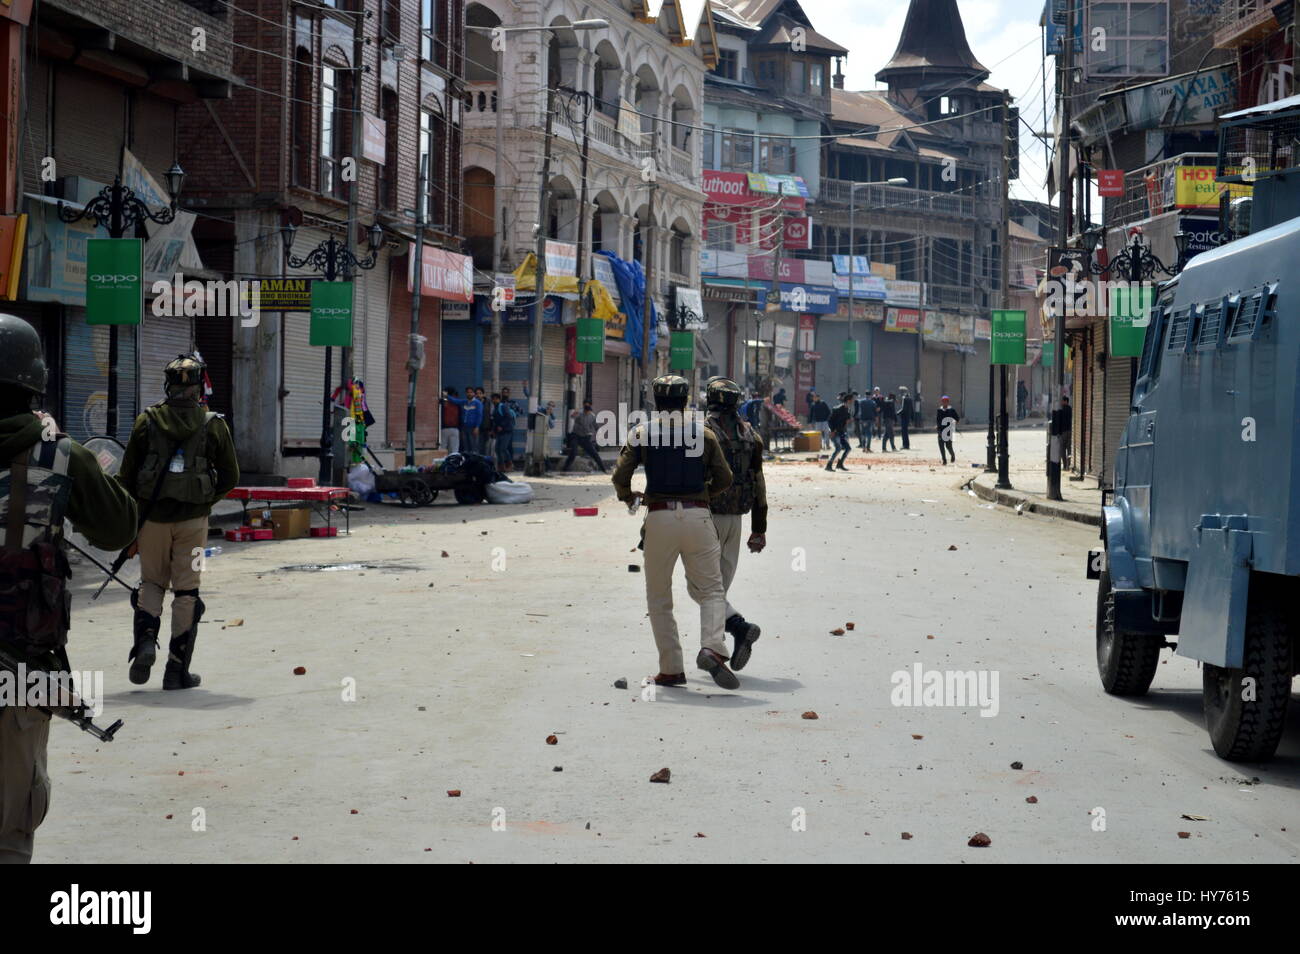 Srinagar, India. 01st Apr, 2017. Paramilitary soldiers rush near the Lal Chowk in Srinagar on Saturday after few gunshots were heard near Taj Hotel in historical Business hub Lal Chowk in Srinagar in India controlled Kashmir, on 1 April 2017 as Kashmiri youth protesters heavy stone pelting at Paramilitary and police and police use heavy teargas shelling to dispurse kashmiri protesters assemble around commercial areas in the Srinagar city. Credit: Zahid Hussain Bhat/Pacific Press/Alamy Live News Stock Photo